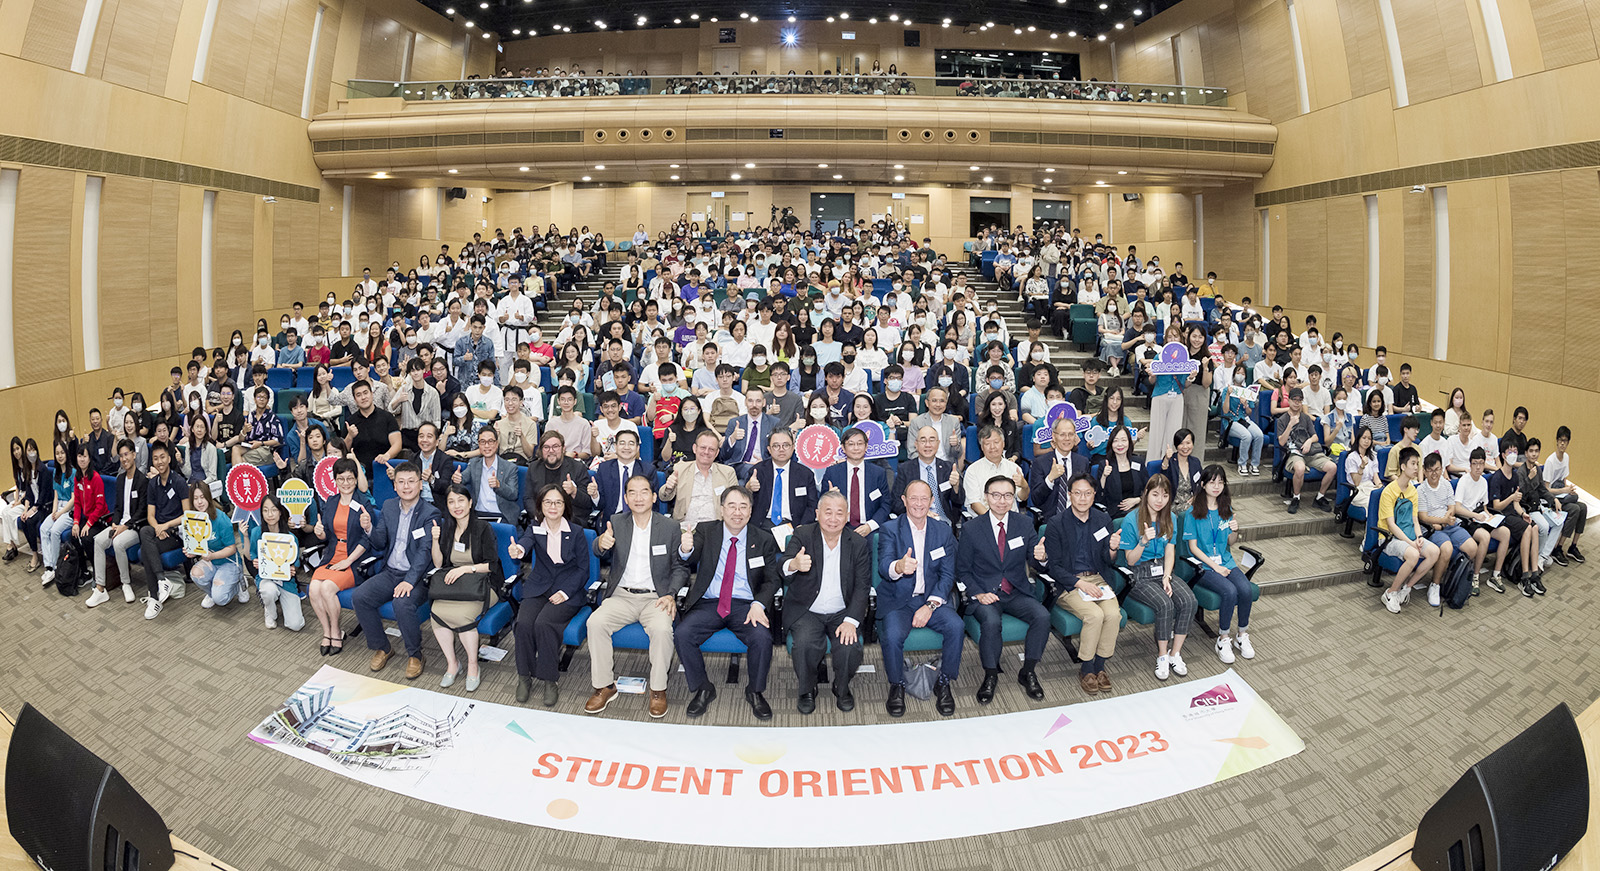 New students were warmly welcomed at the University Welcoming Ceremony